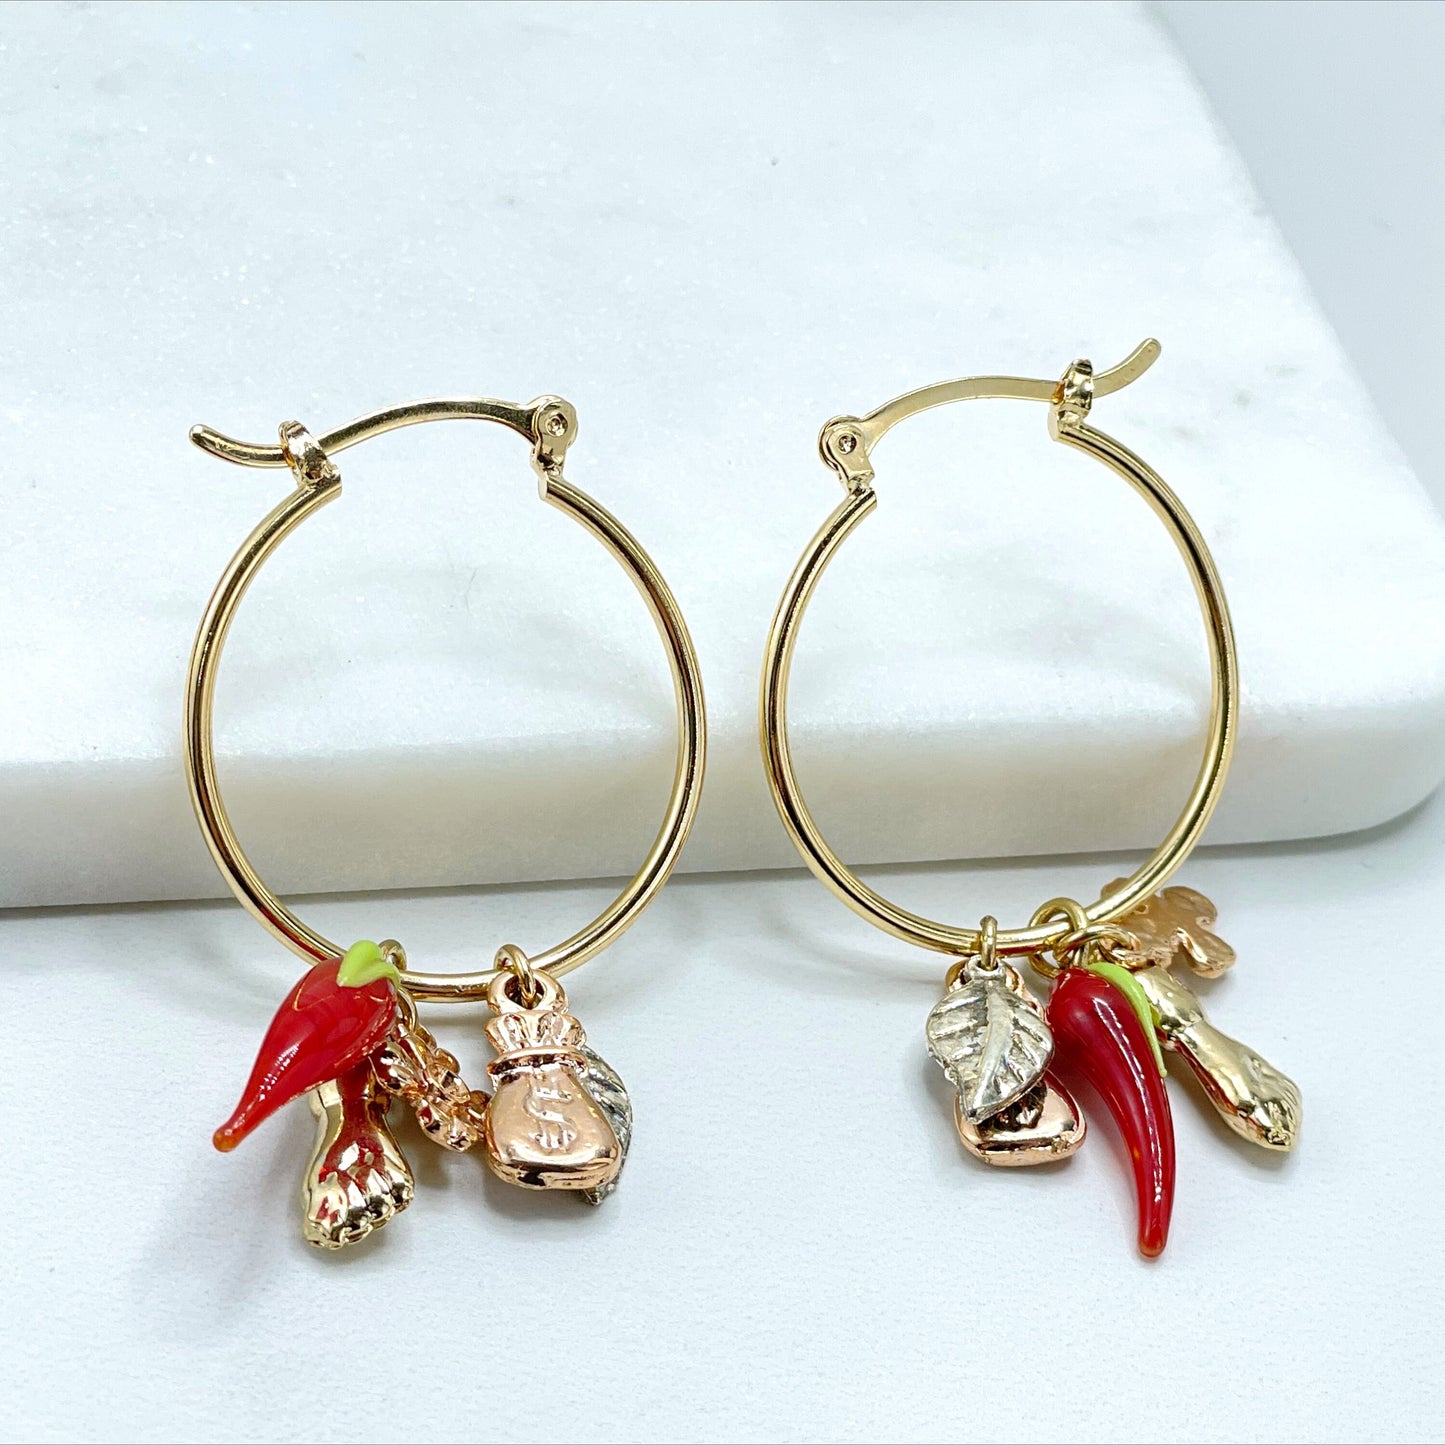 18k Gold Filled Lucky Luck Hoops with Chili, Money Bag, Leaf, Hand & Clover Charms, 28mm Hoops Earrings, Wholesale Jewelry Making Supplies